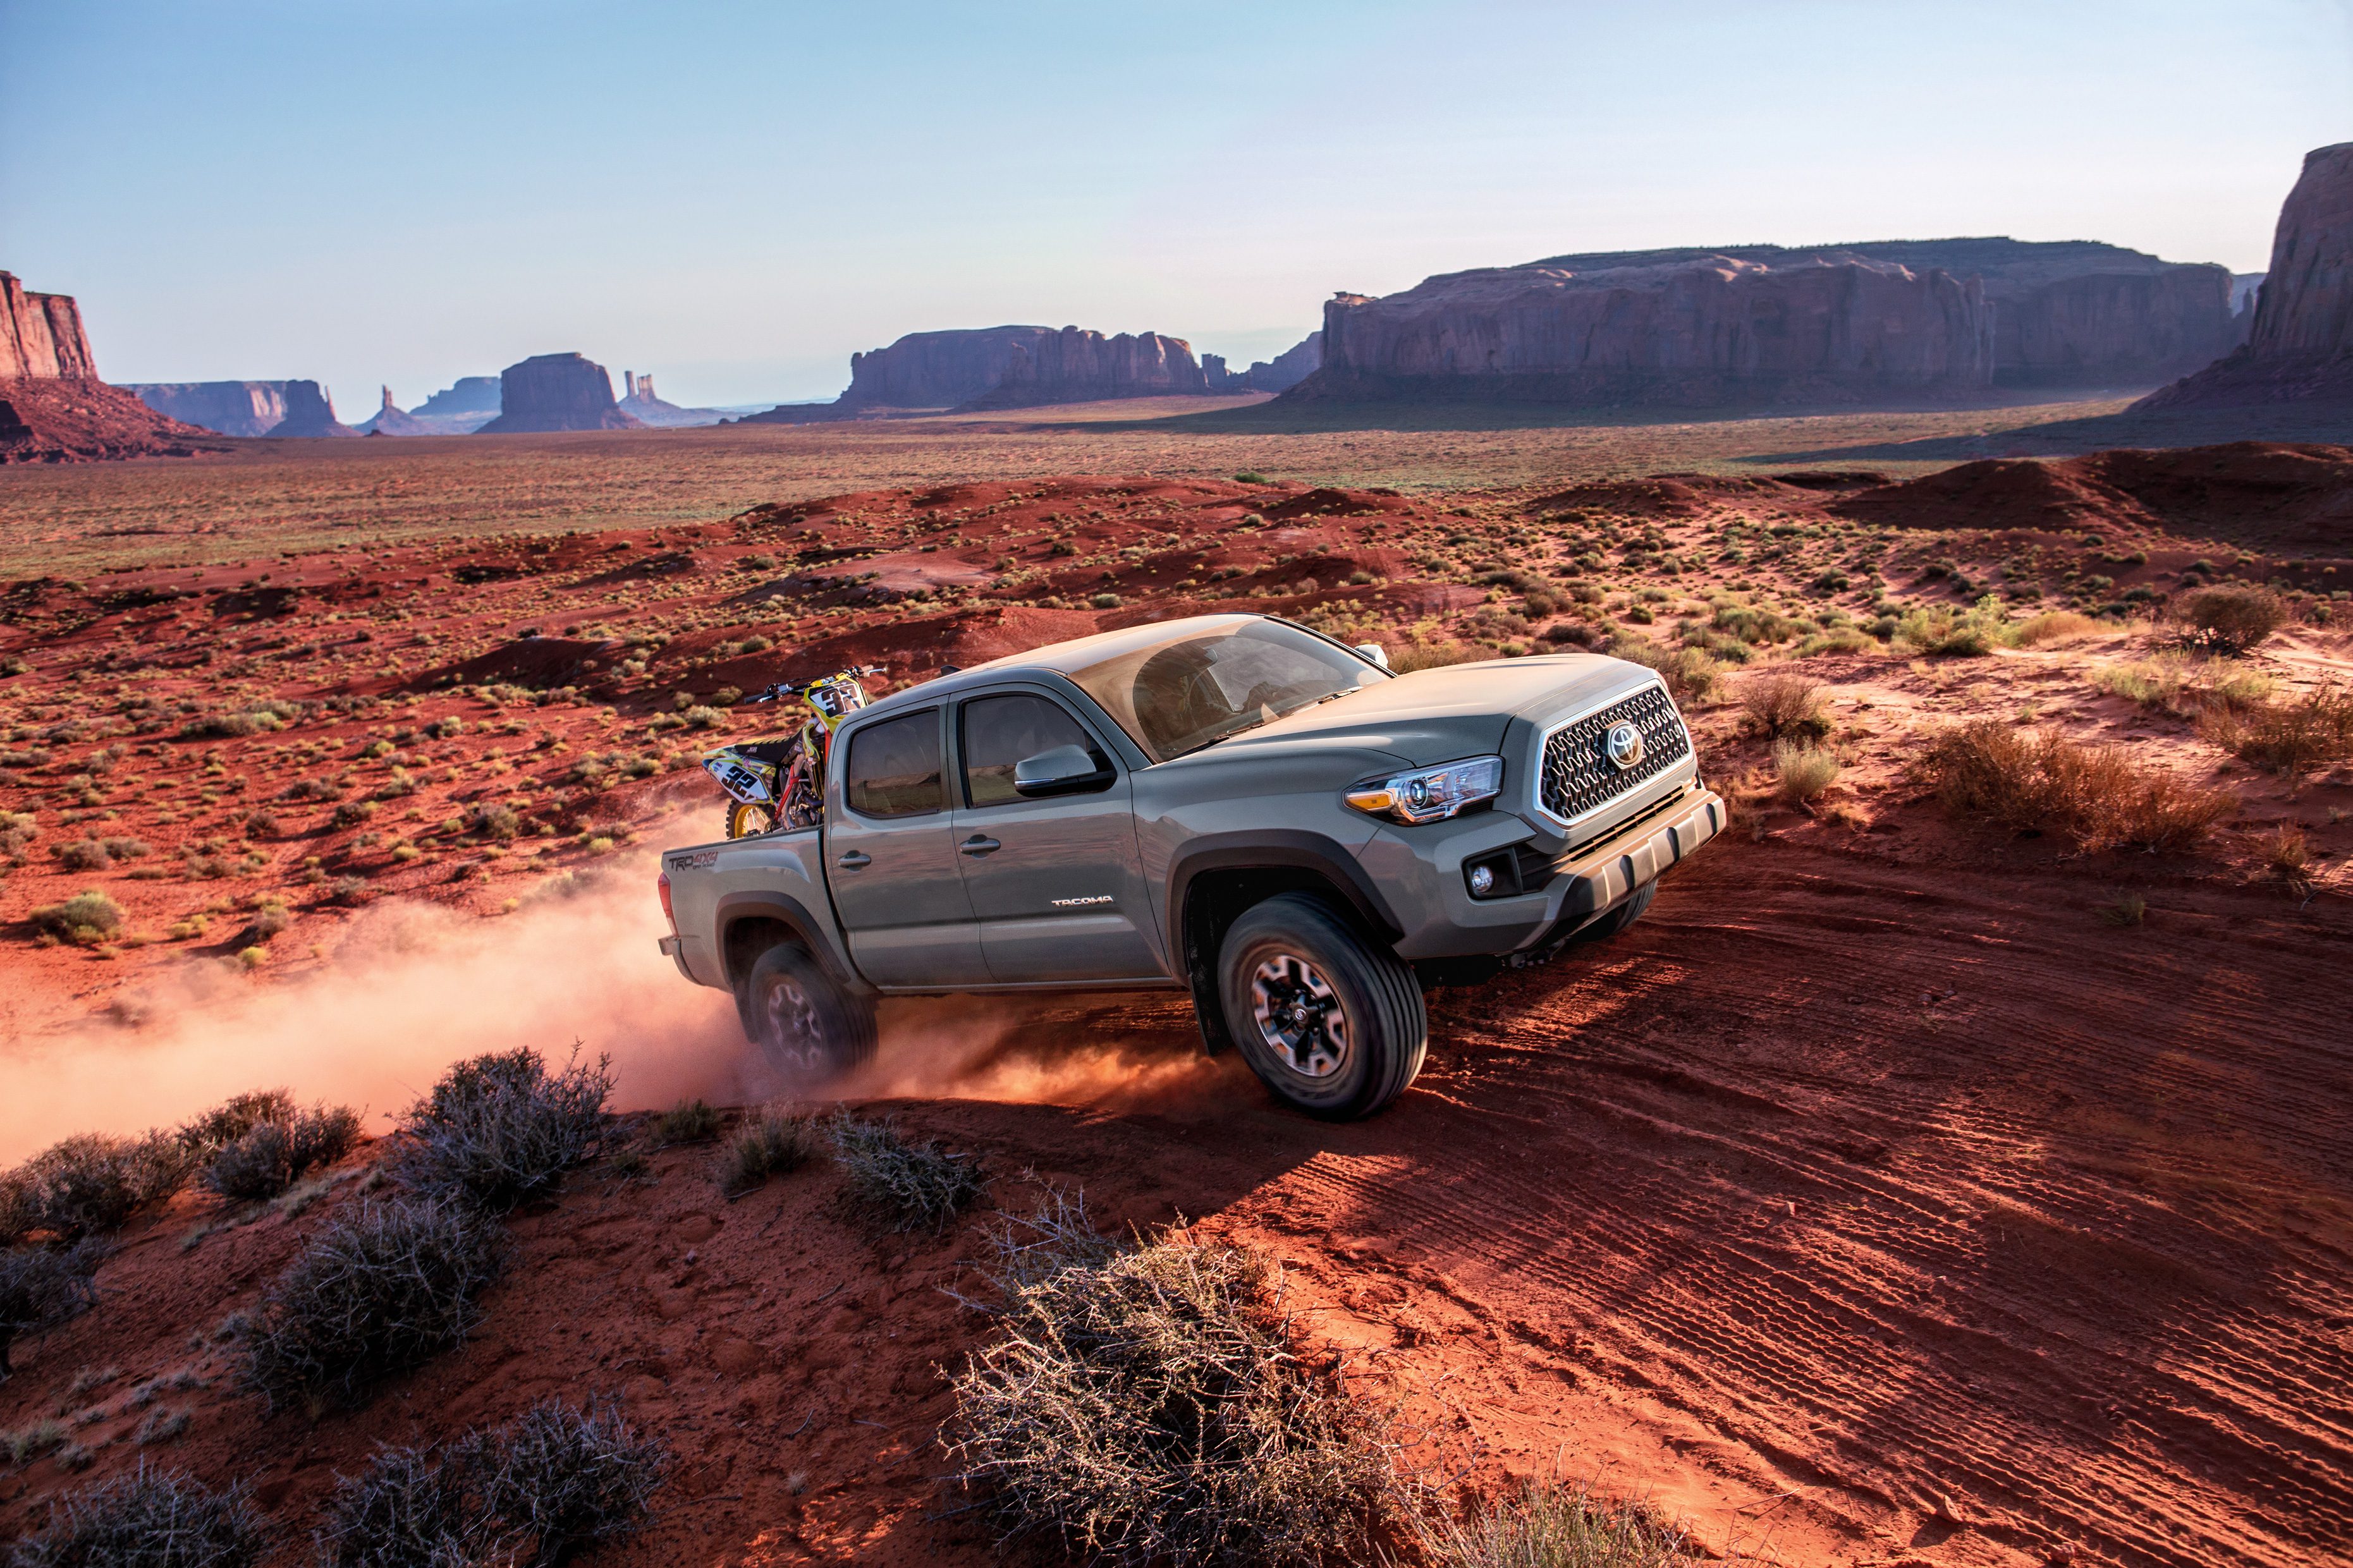 Can the Toyota Tacoma Tow a Camper Trailer?